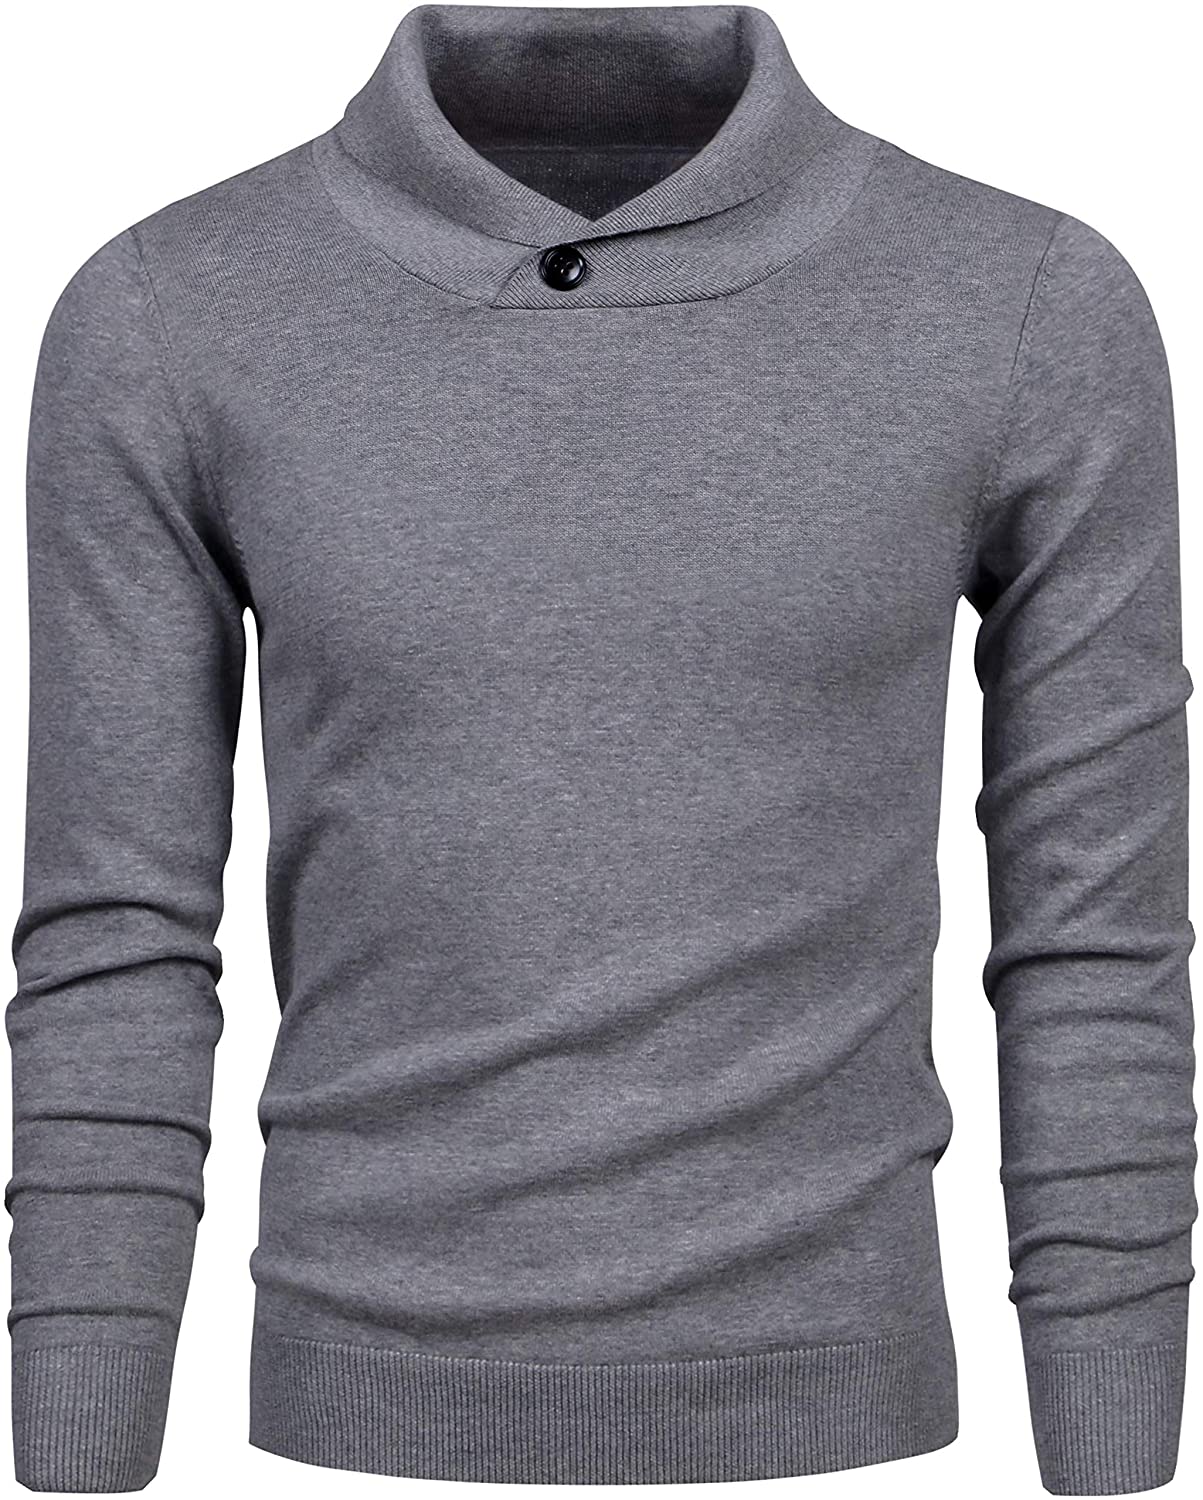 LTIFONE Mens Shawl Sweaters,Casual Slim Fit,Knitted Collar Long Sleeve ...